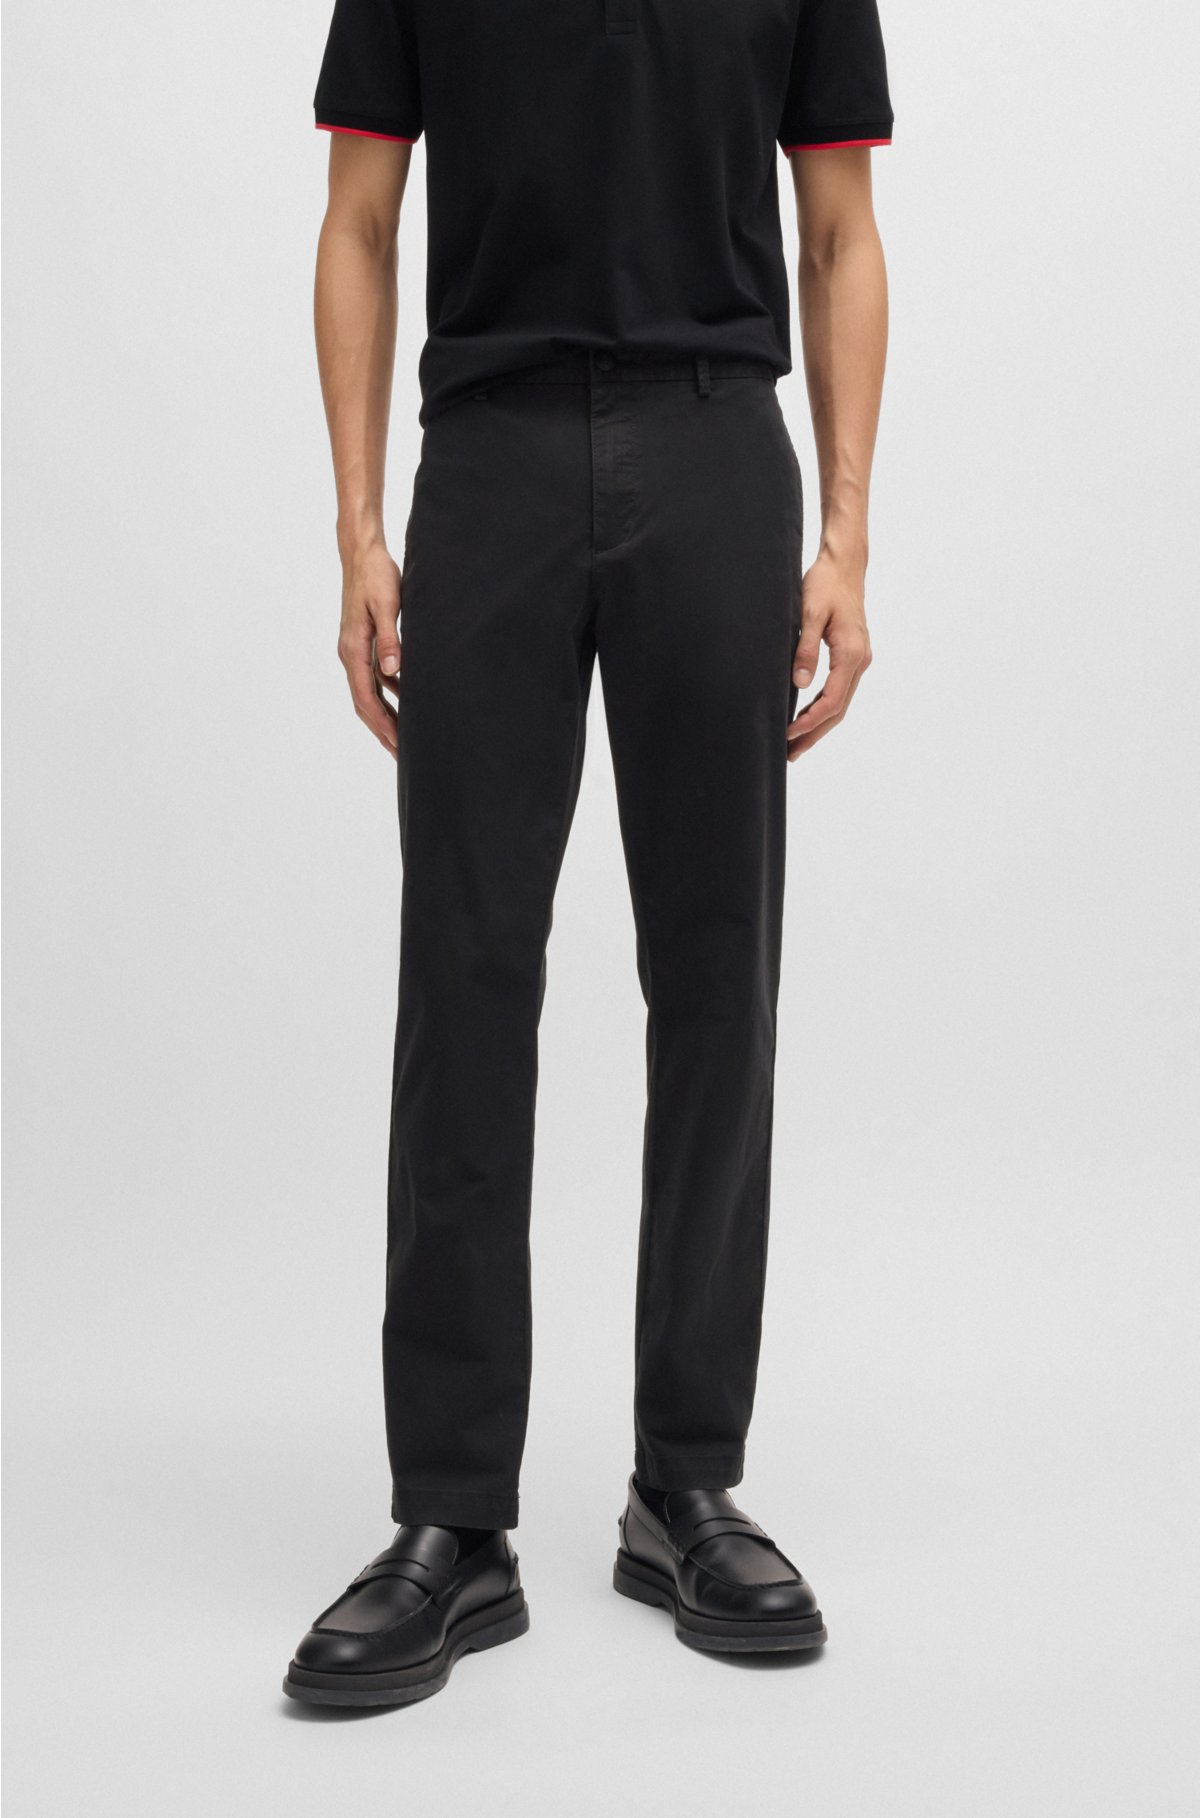 Casual trousers for men by HUGO BOSS